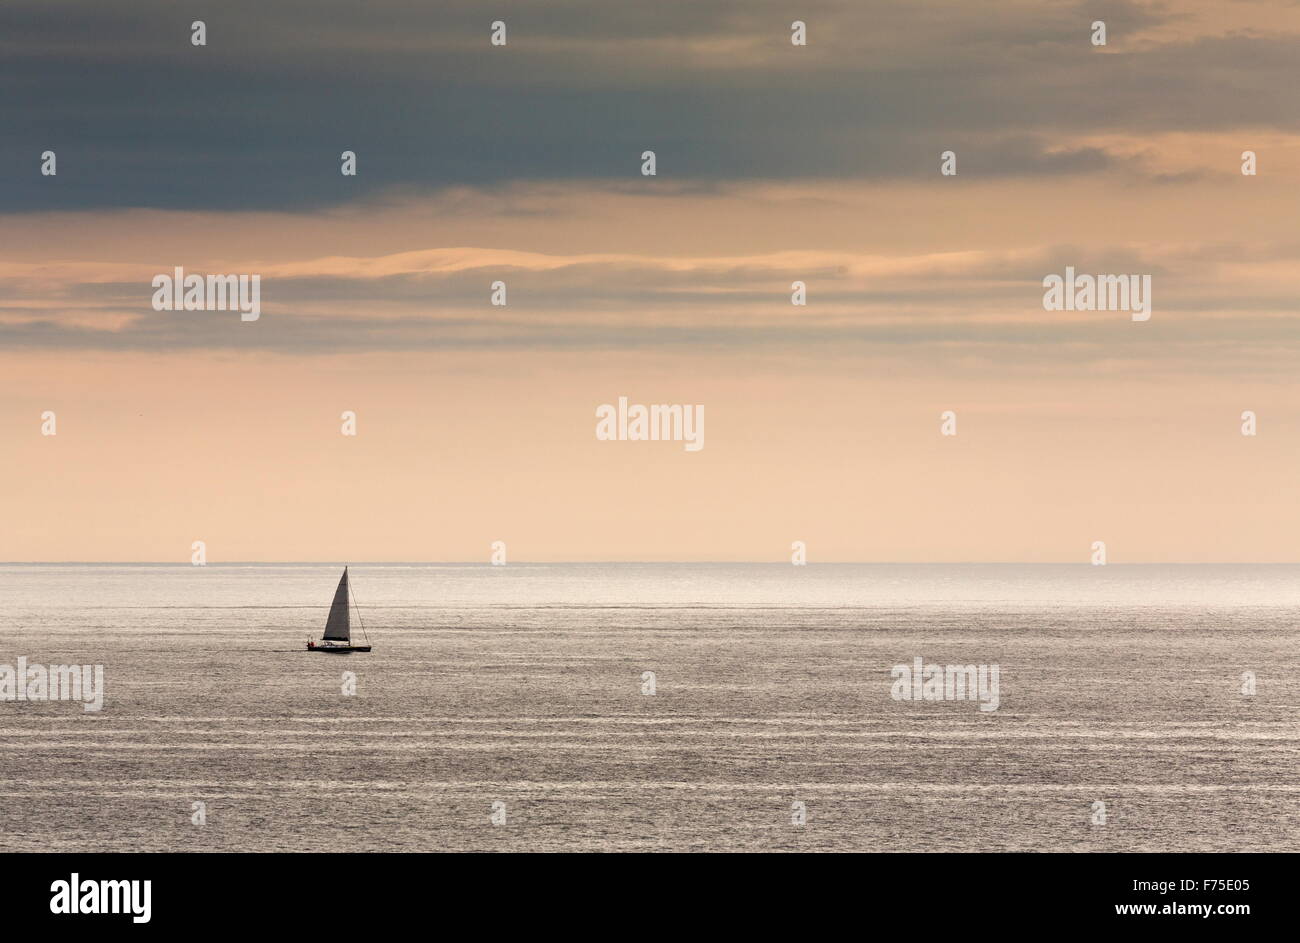 Lone sailing boat at sunset, in the Gulf of St Lawrence, off Newfoundland. Stock Photo